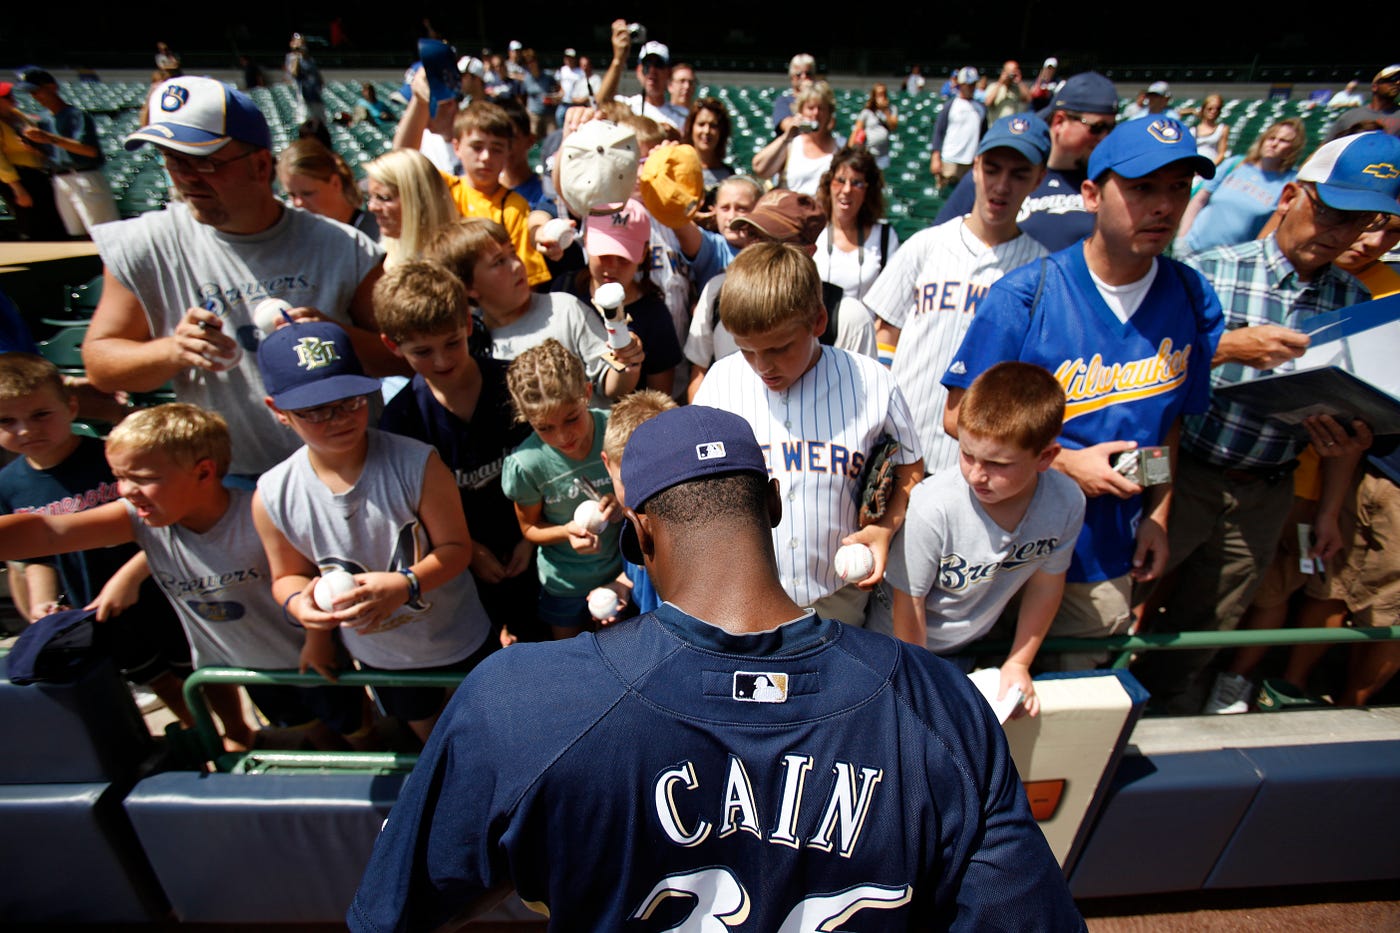 NEW ACQUISITIONS LORENZO CAIN AND CHRISTIAN YELICH TO ATTEND BREWERS ON  DECK THIS SUNDAY, by Caitlin Moyer